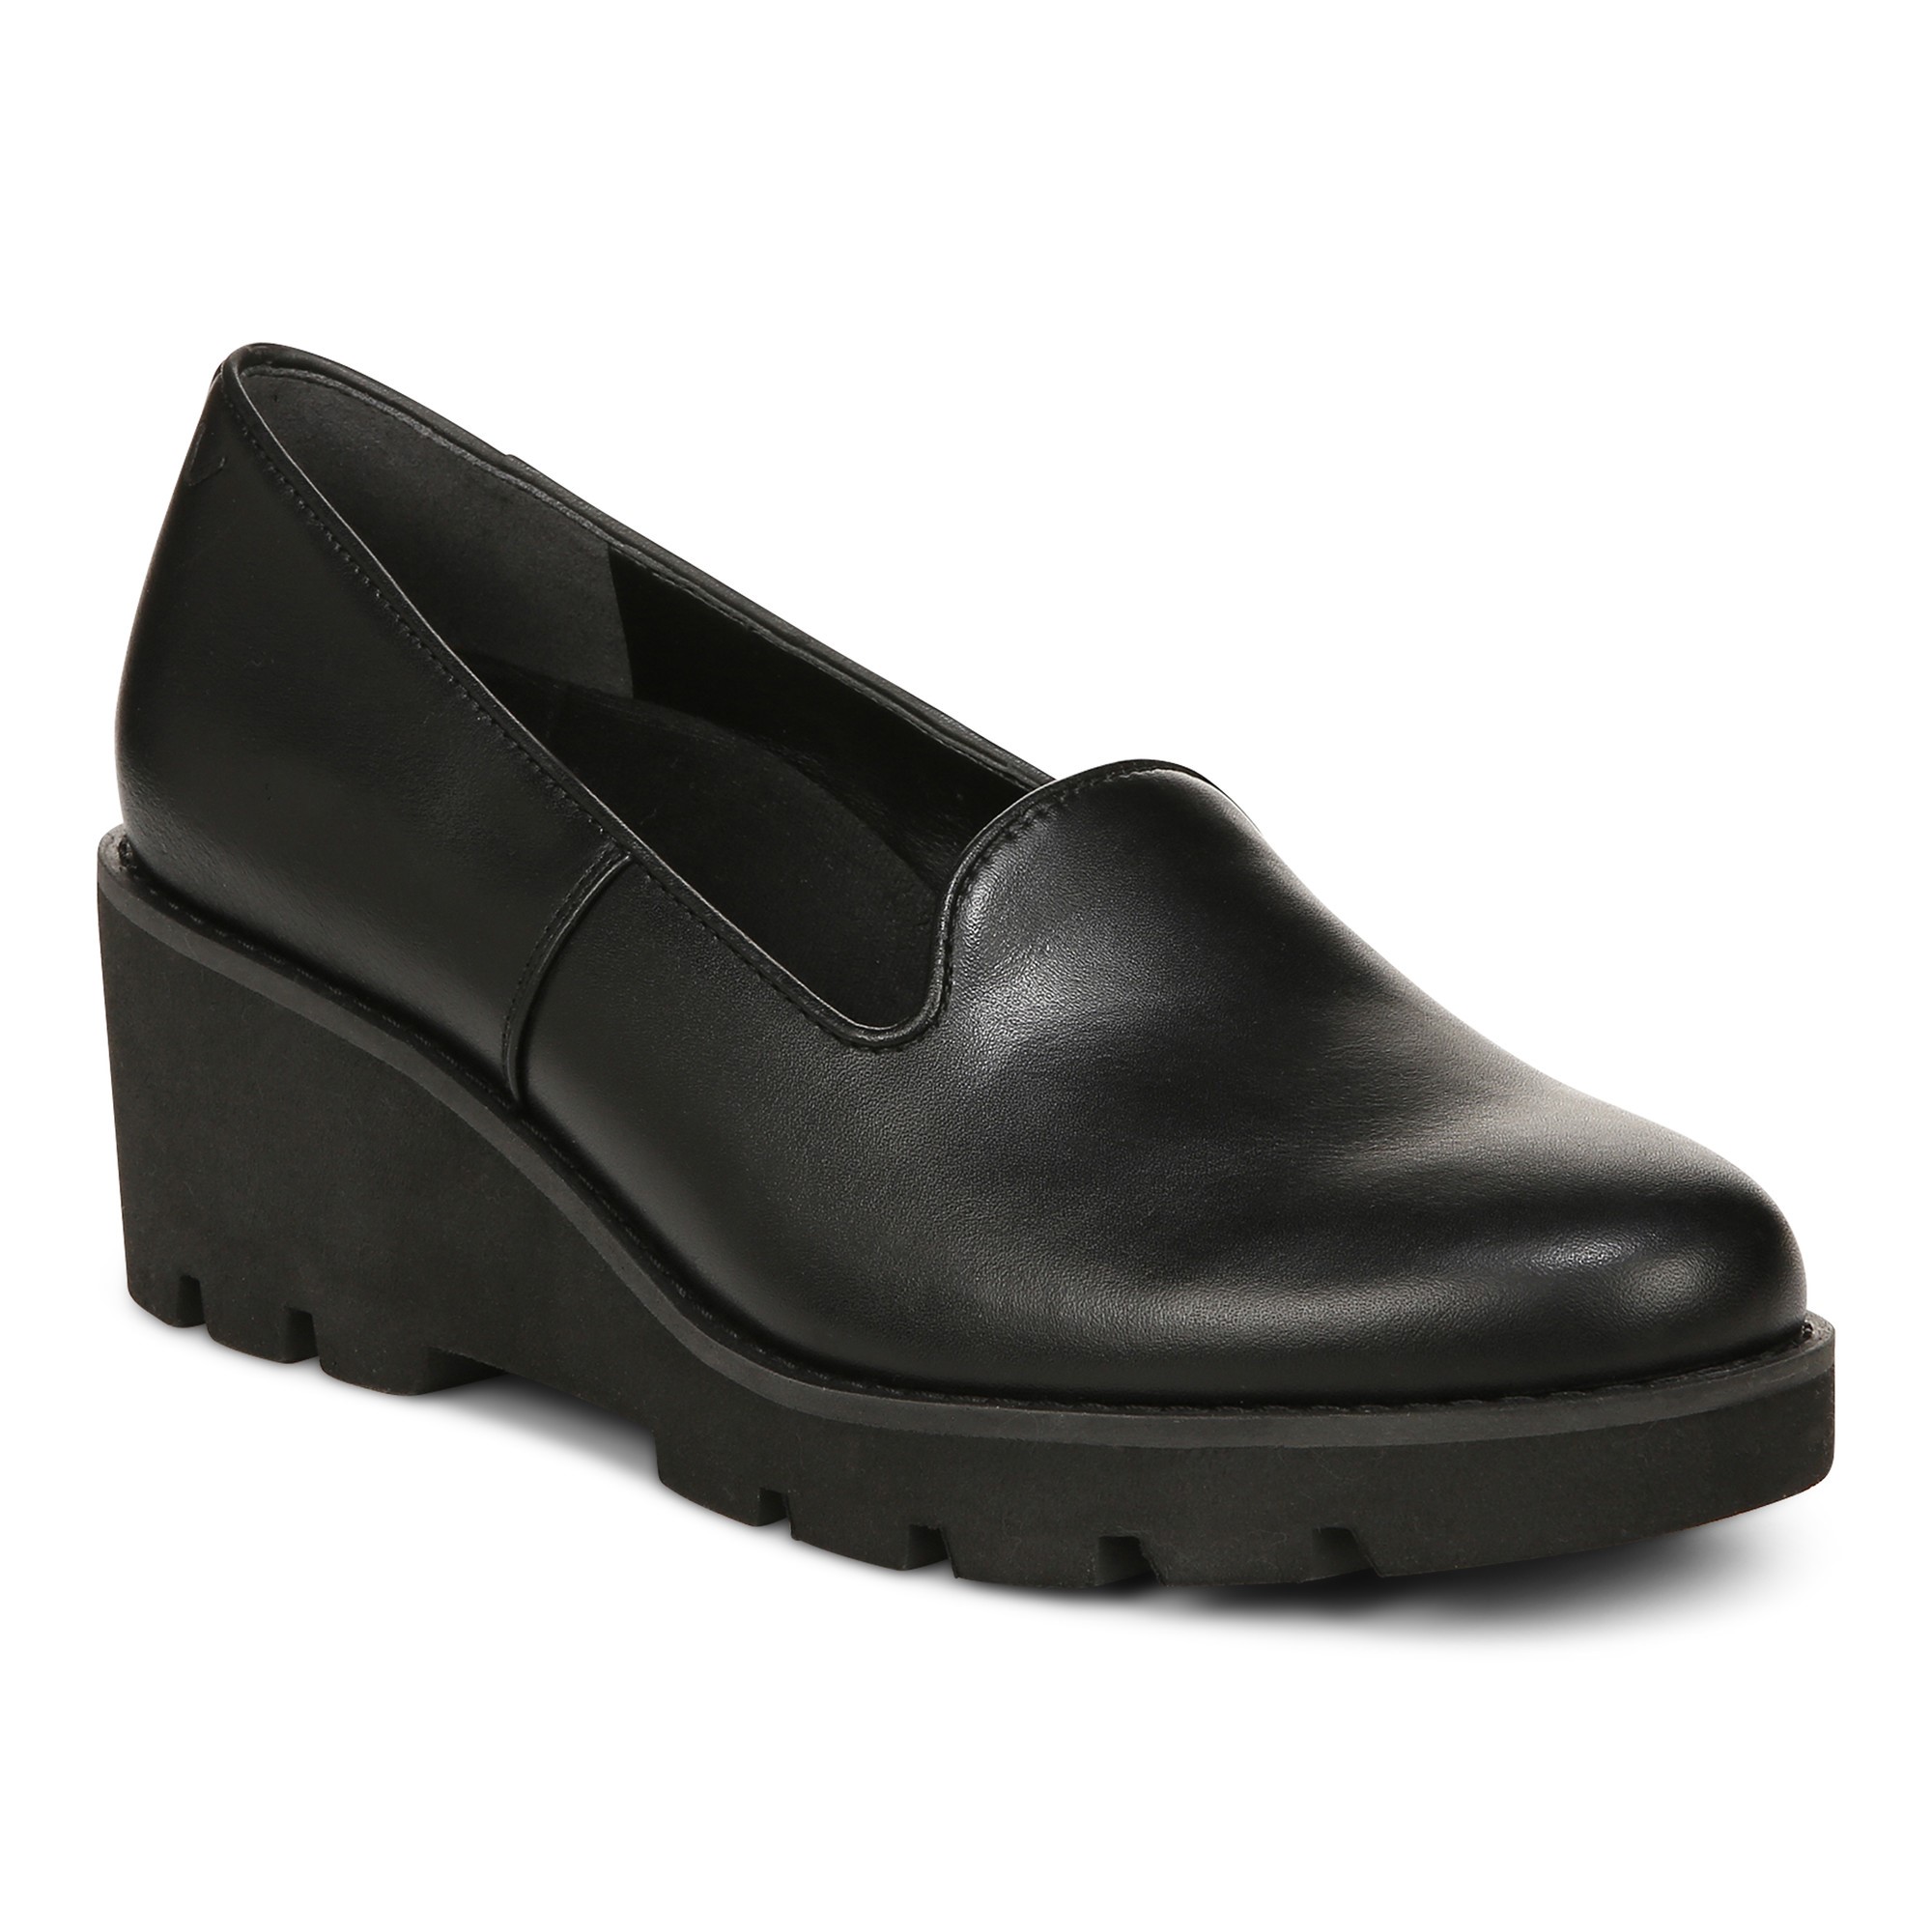 Vionic Willa Wedge Women's Slip-On Loafer Moc Wedge Shoes